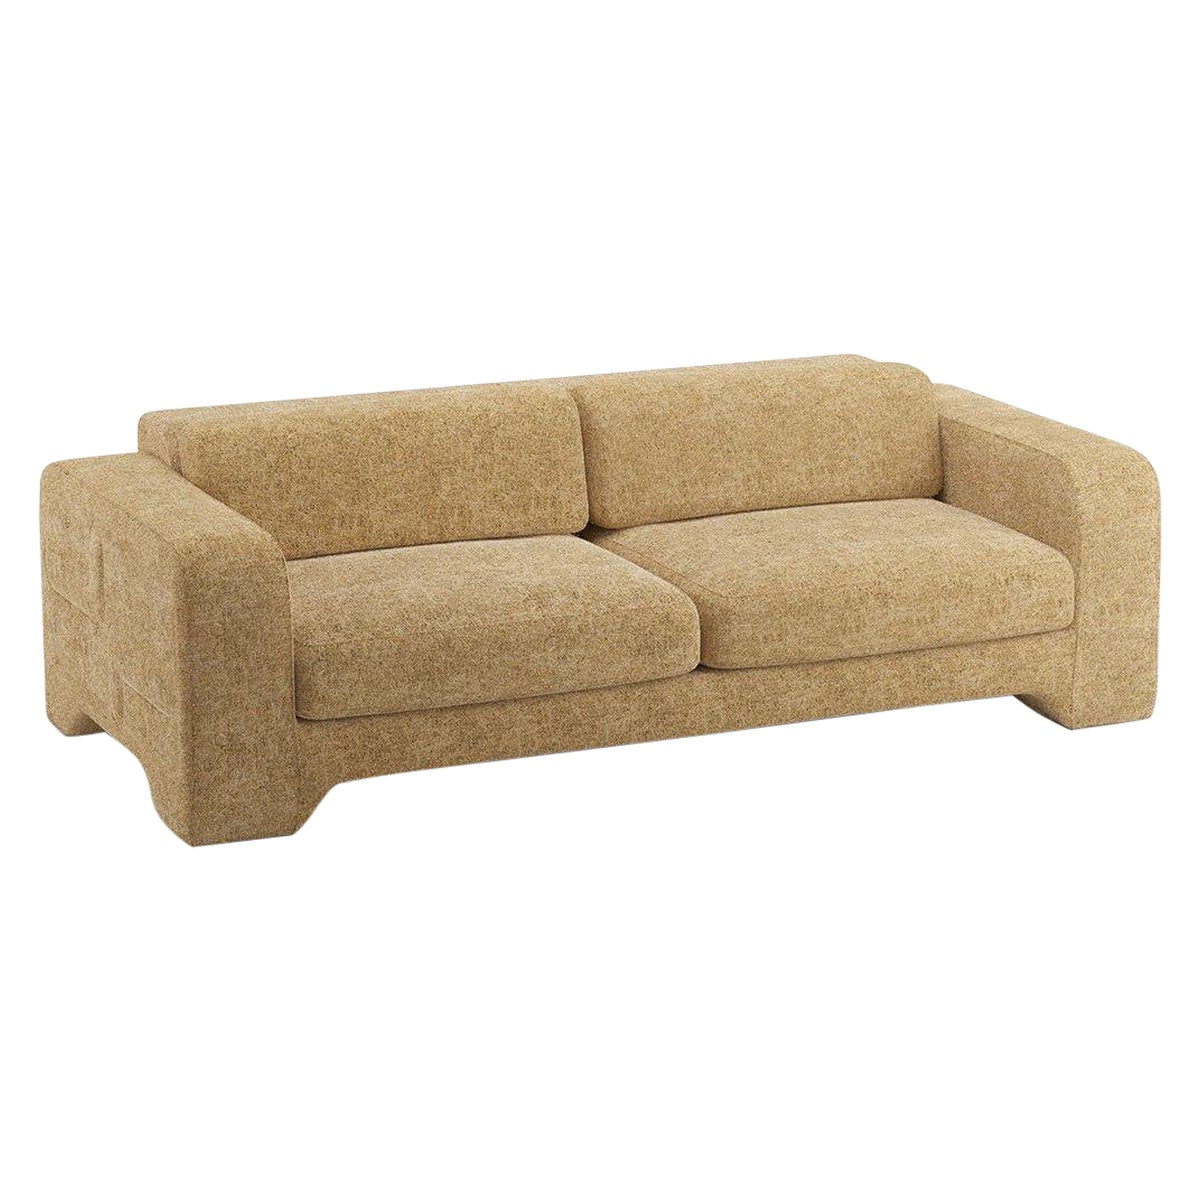 Popus Editions Giovanna 3 Seater Sofa in Ocher London Linen Fabric For Sale